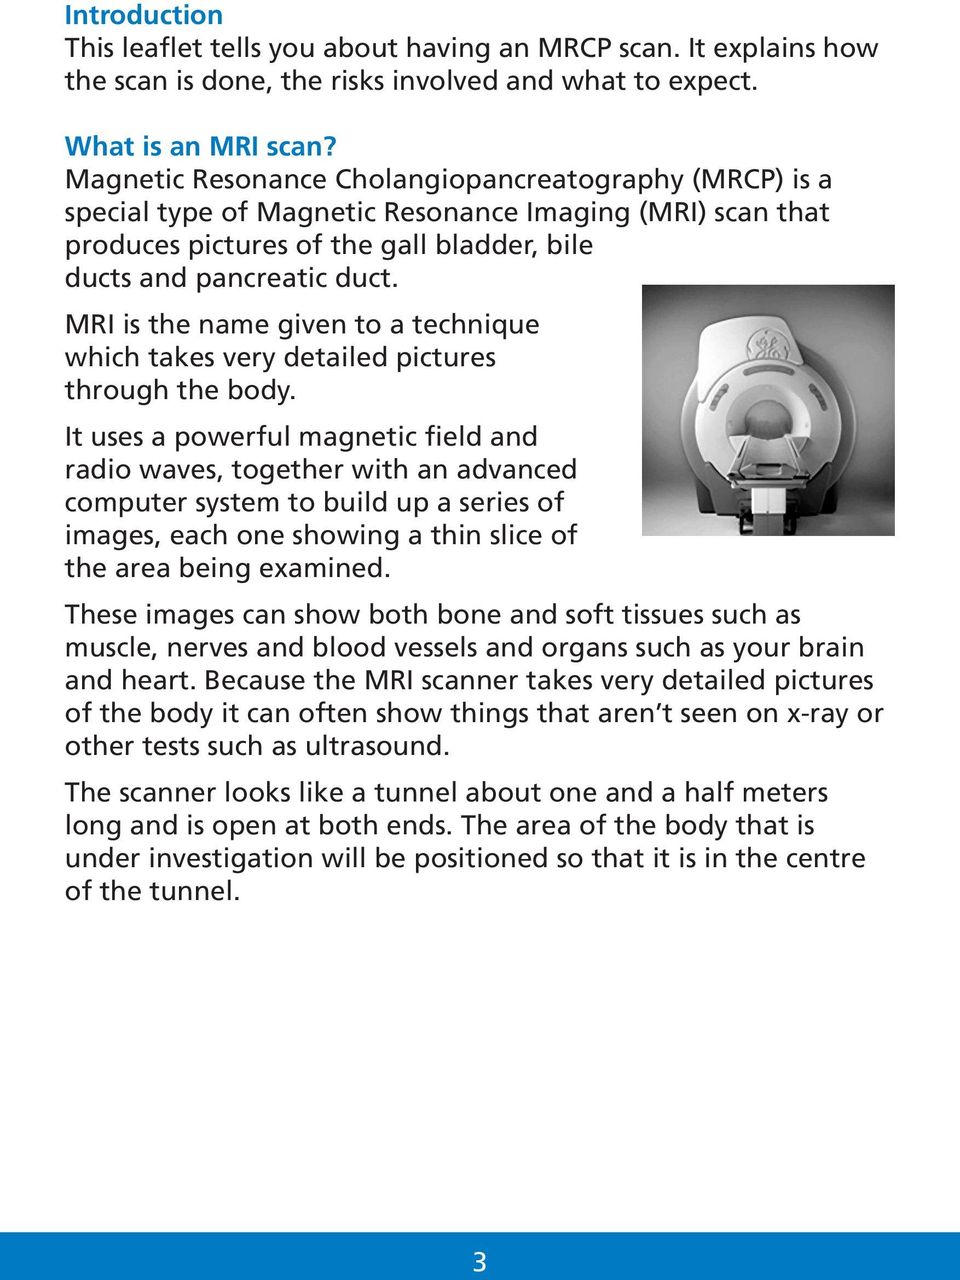 MRI is the name given to a technique which takes very detailed pictures through the body.